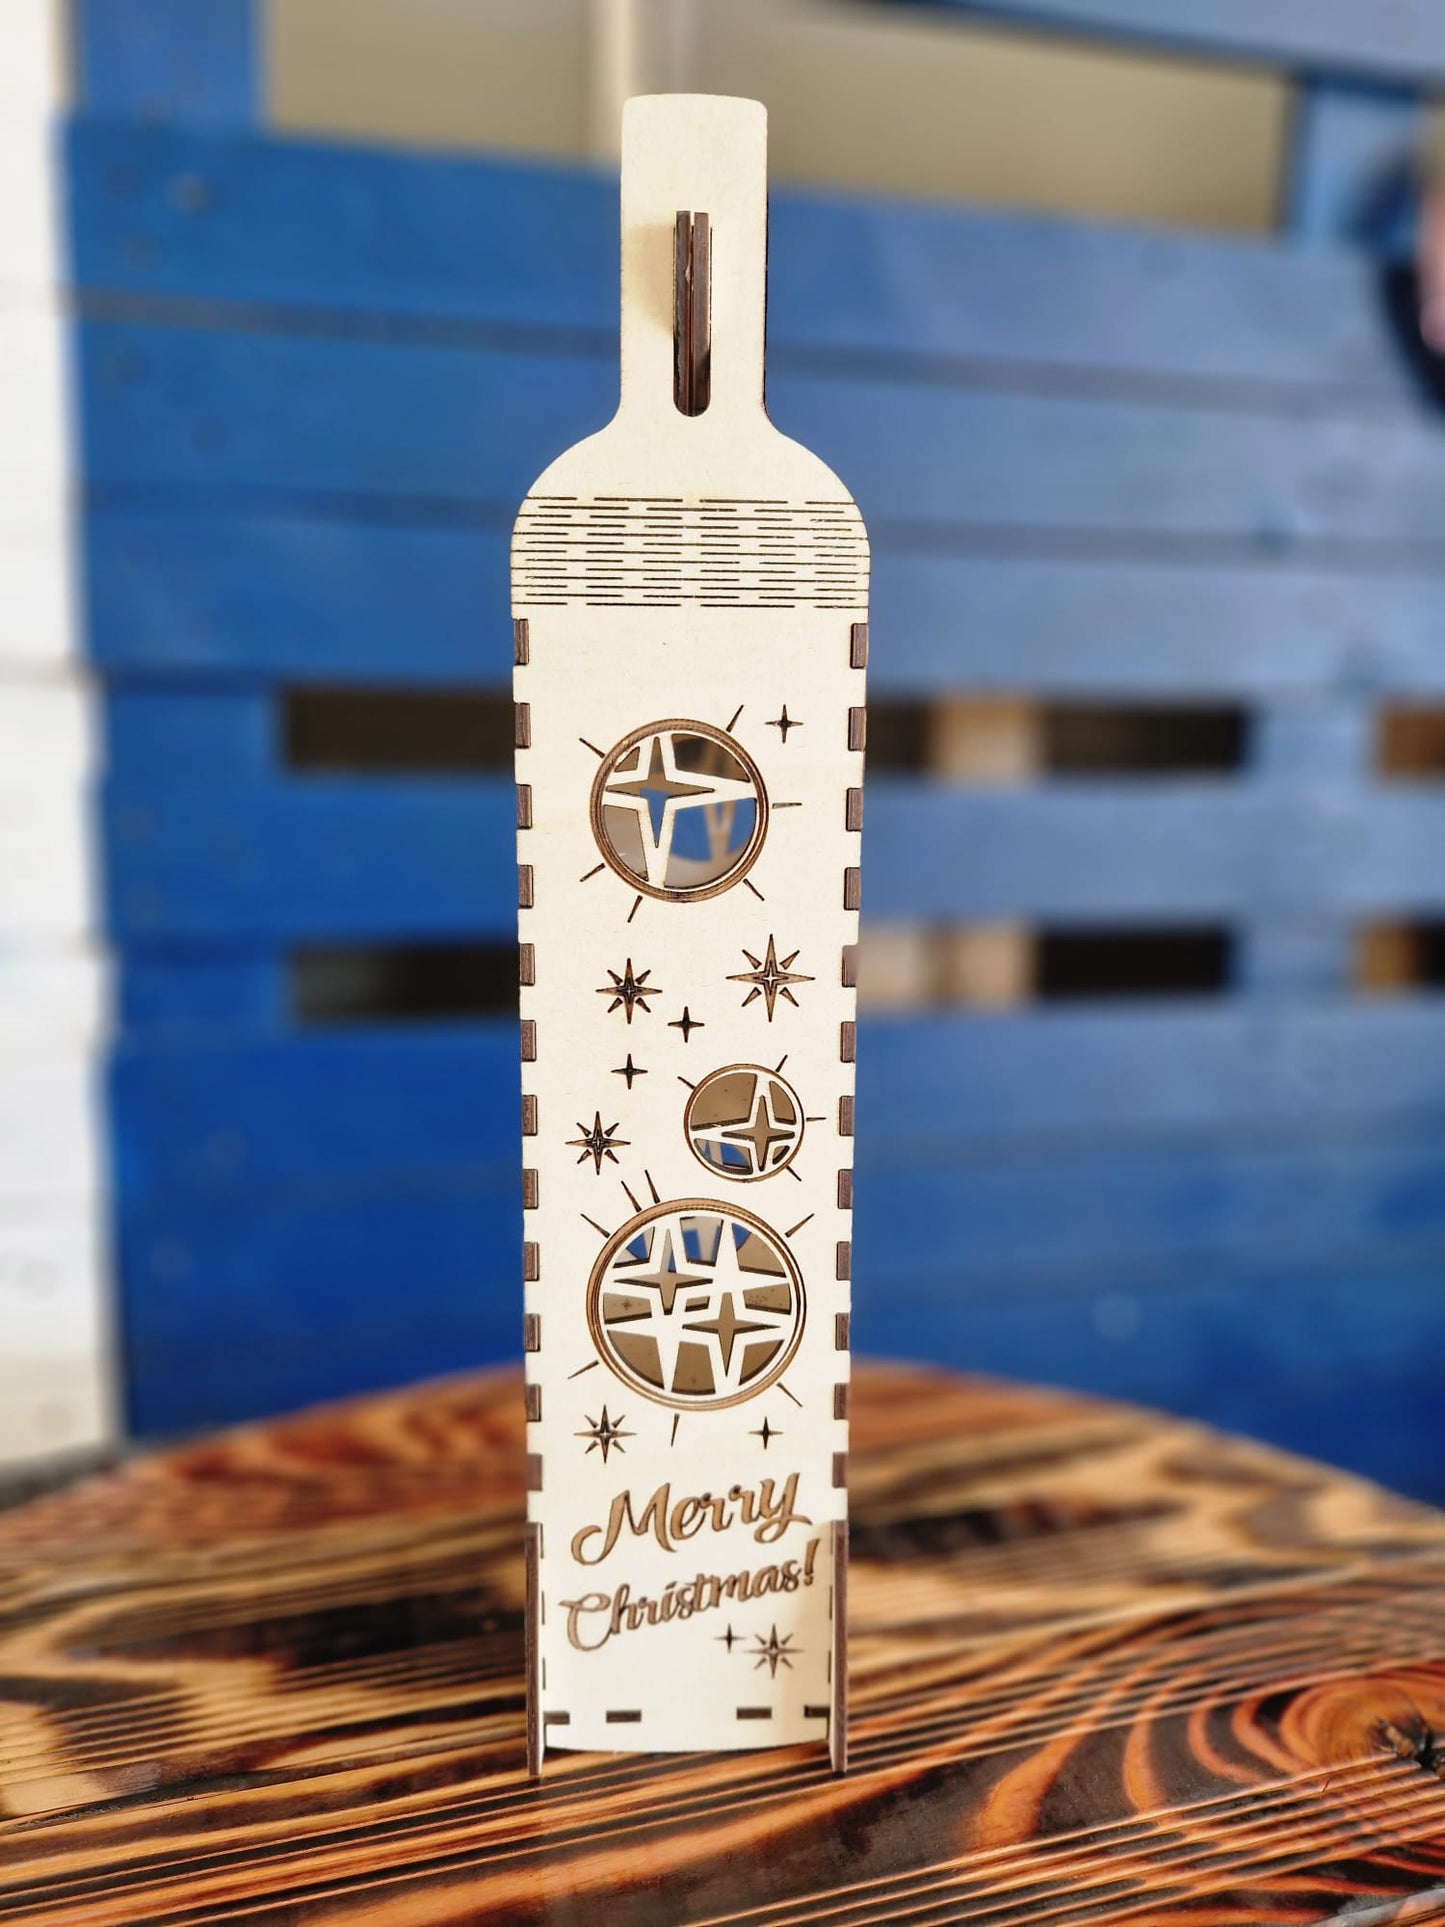 Wooden wine packaging with saying: "Happy New Year"